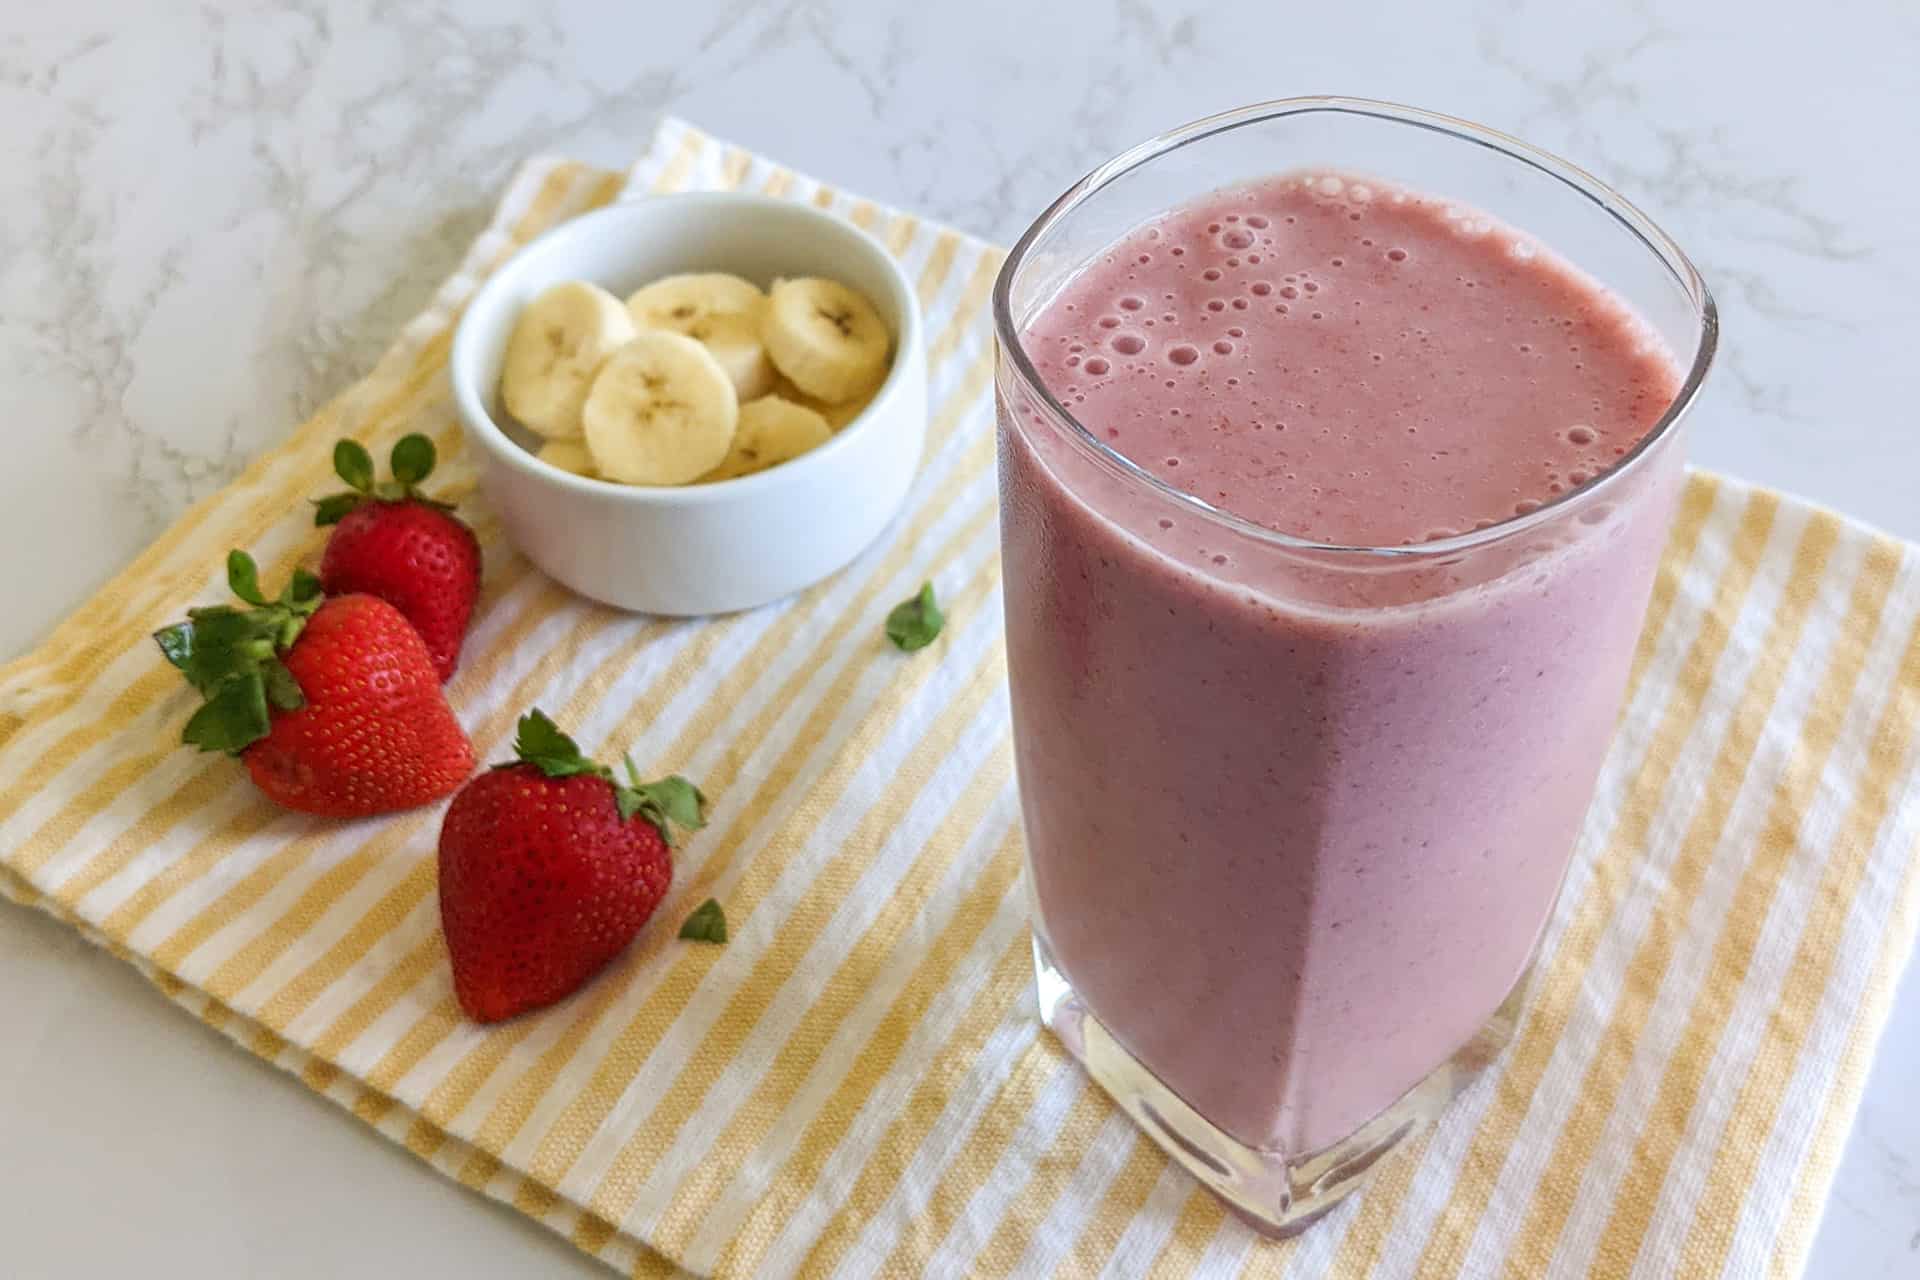 A healthy strawberry and banana smoothie